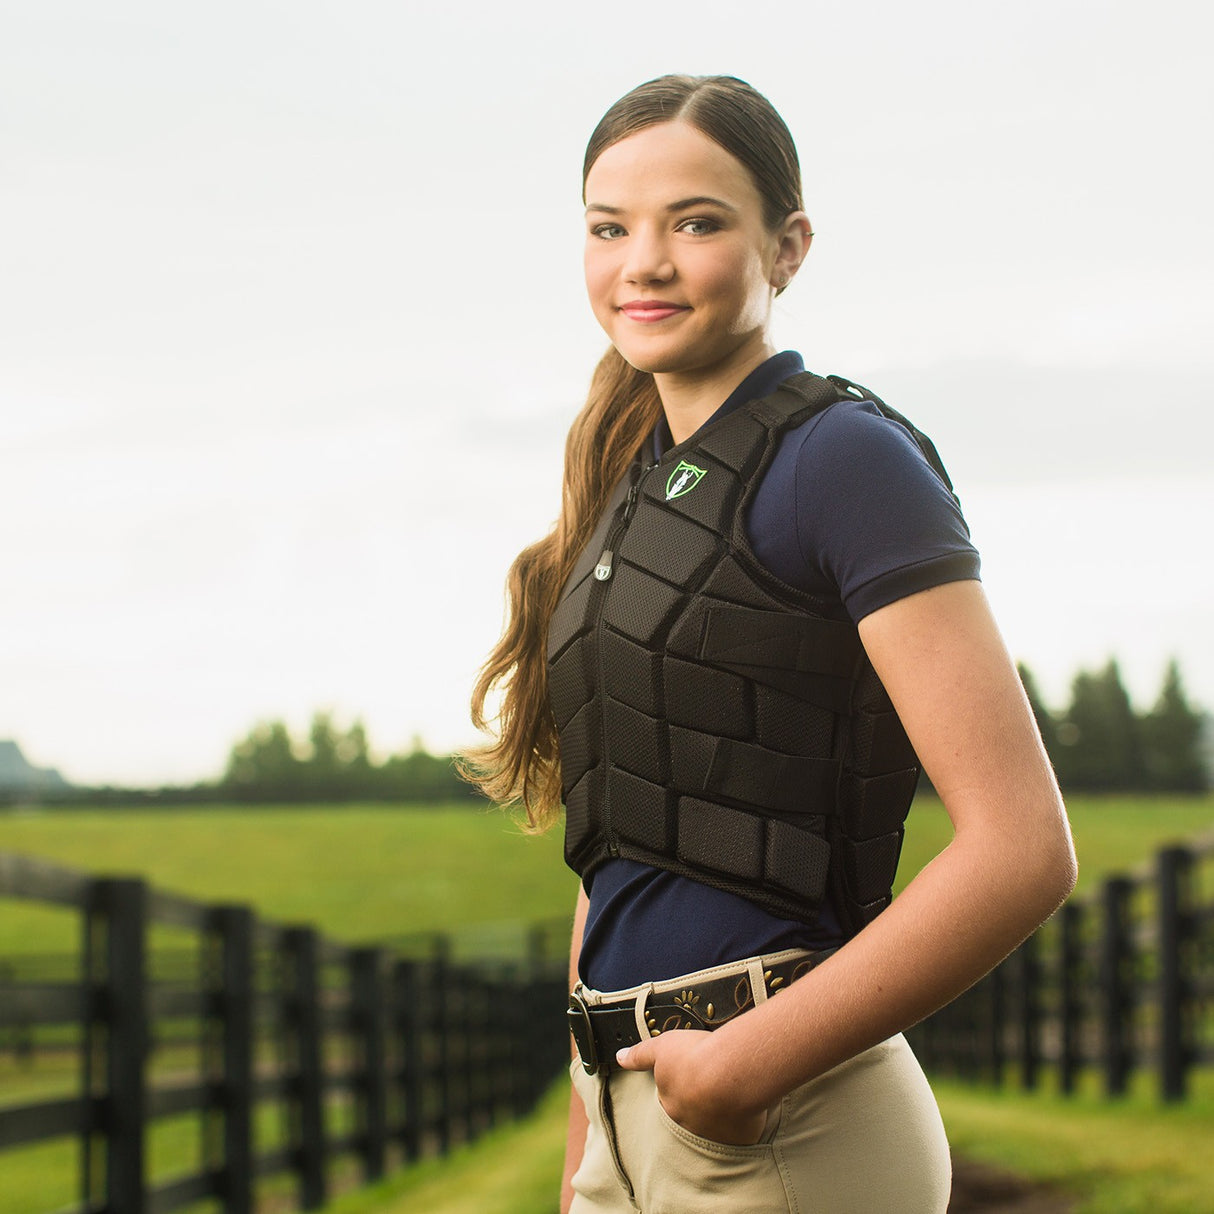 Tipperary Competitor II Vest